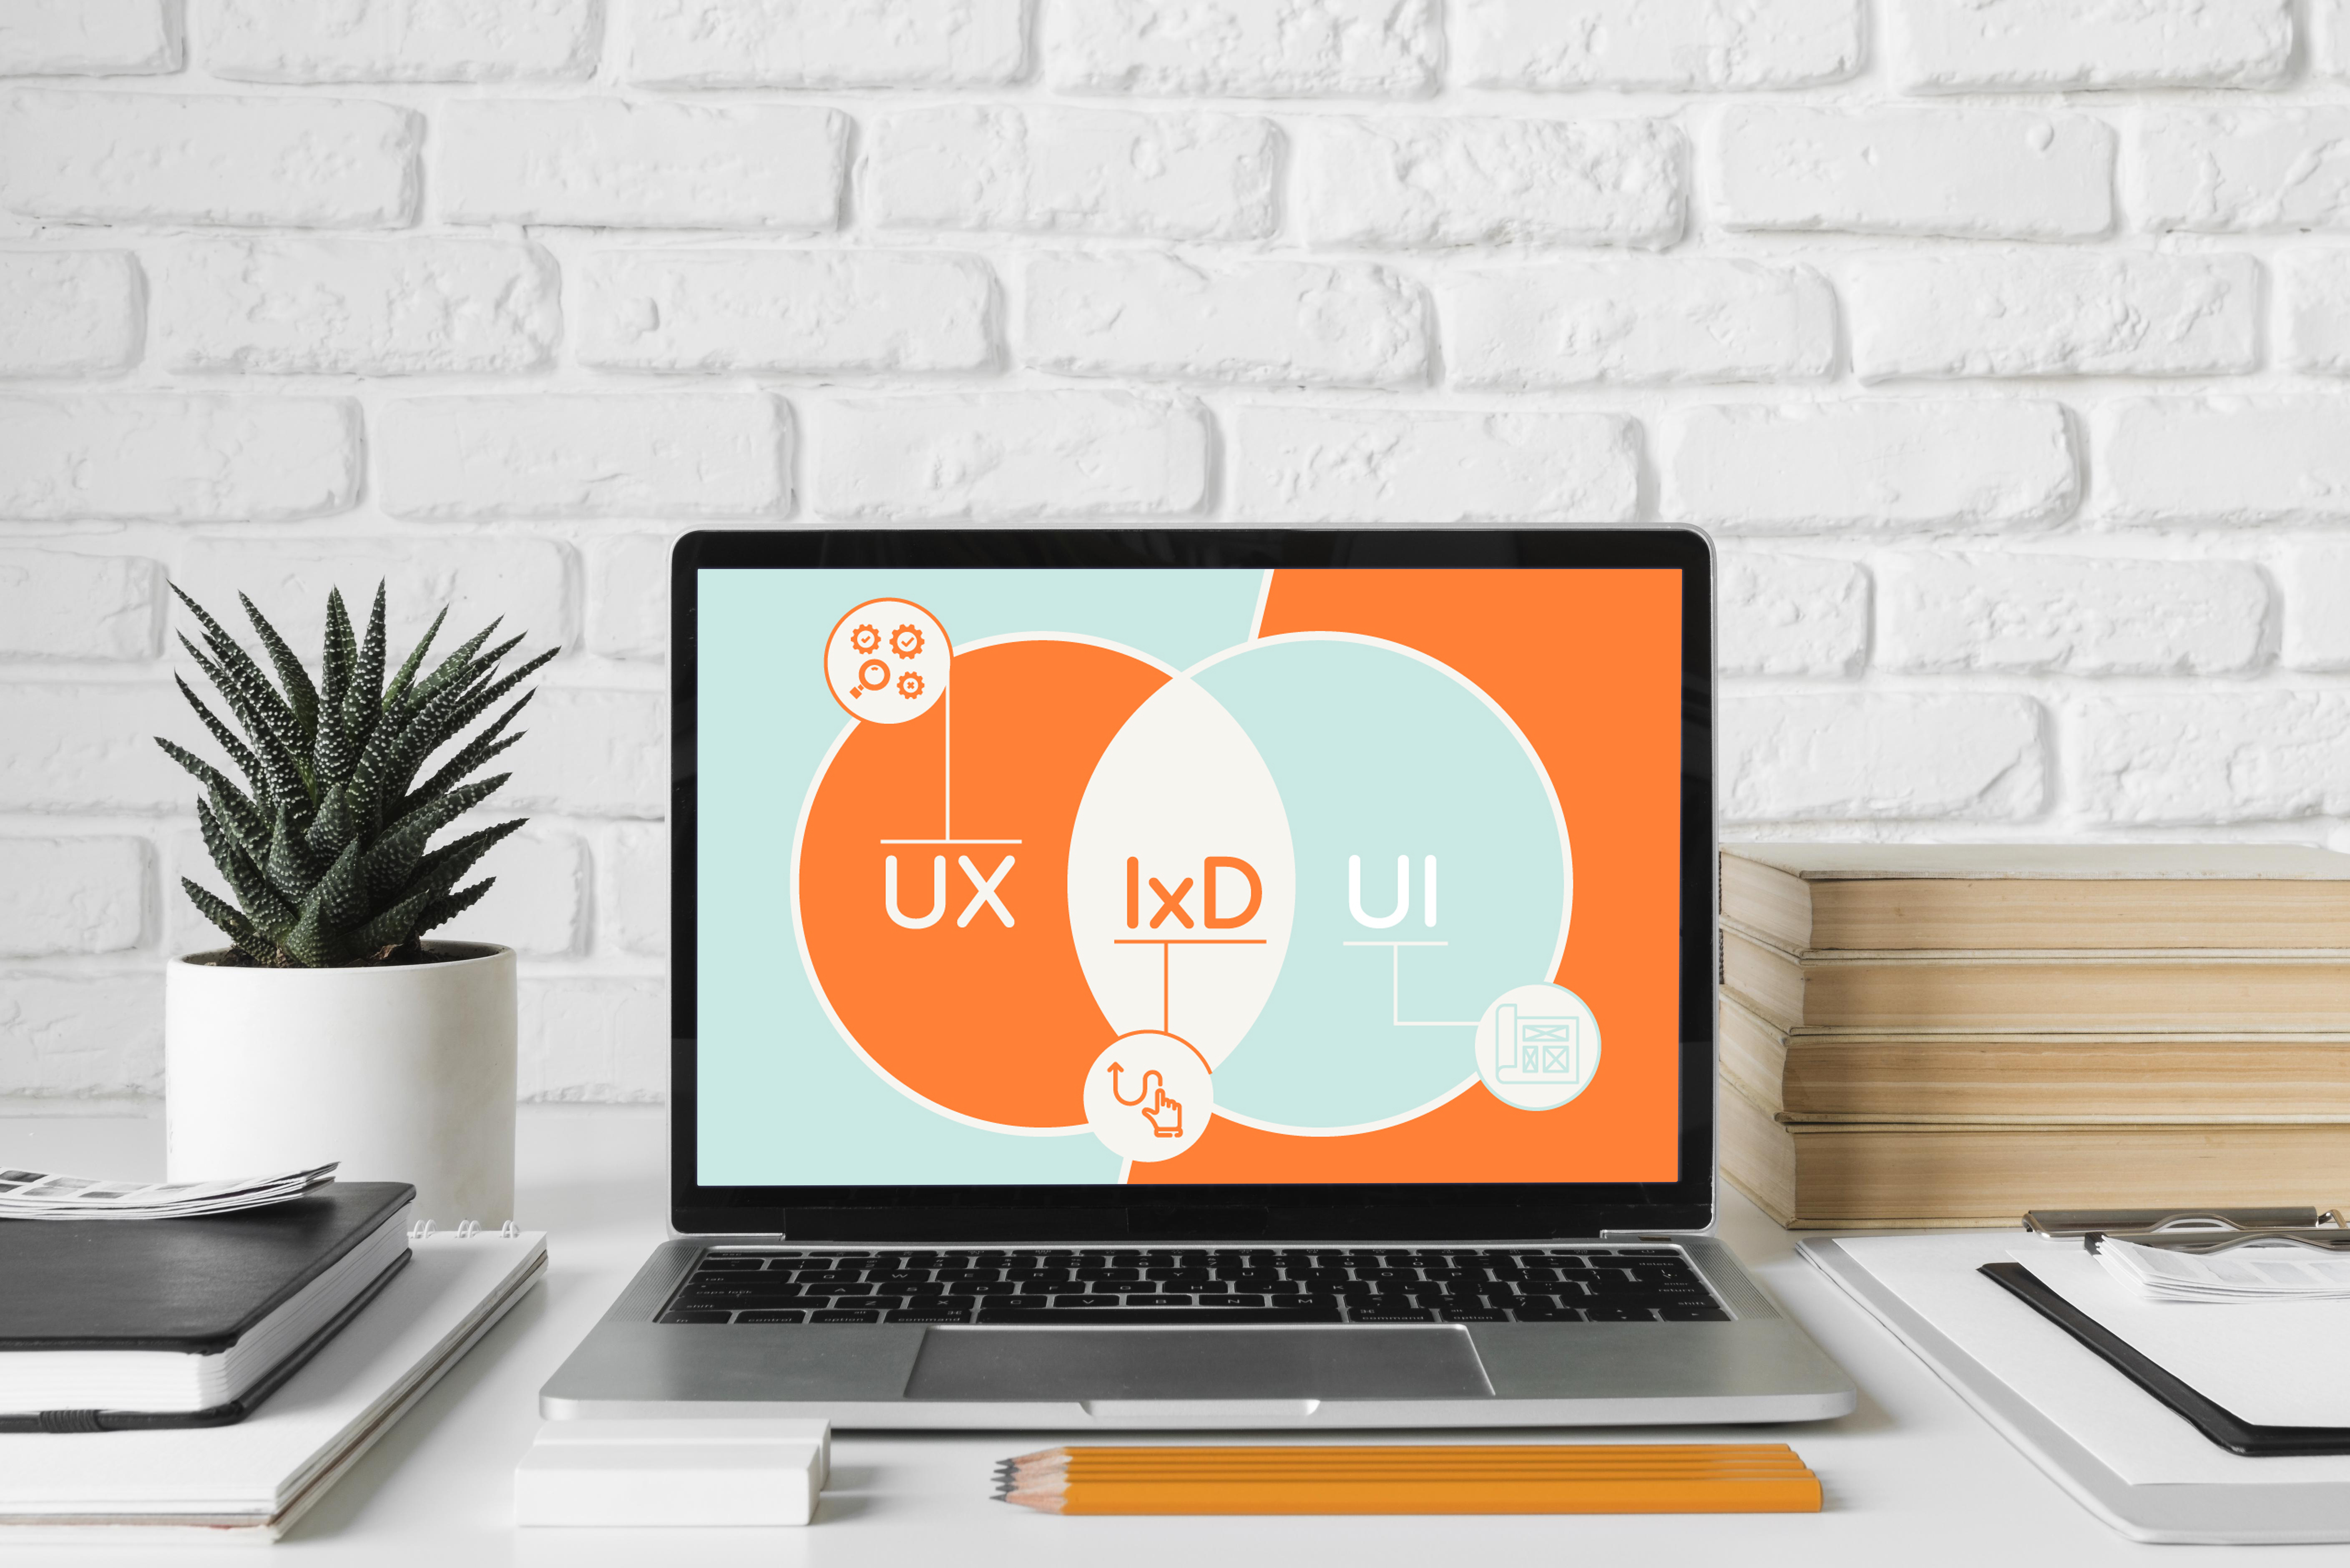 UX, UI and IxD: What are they and how do they differ?